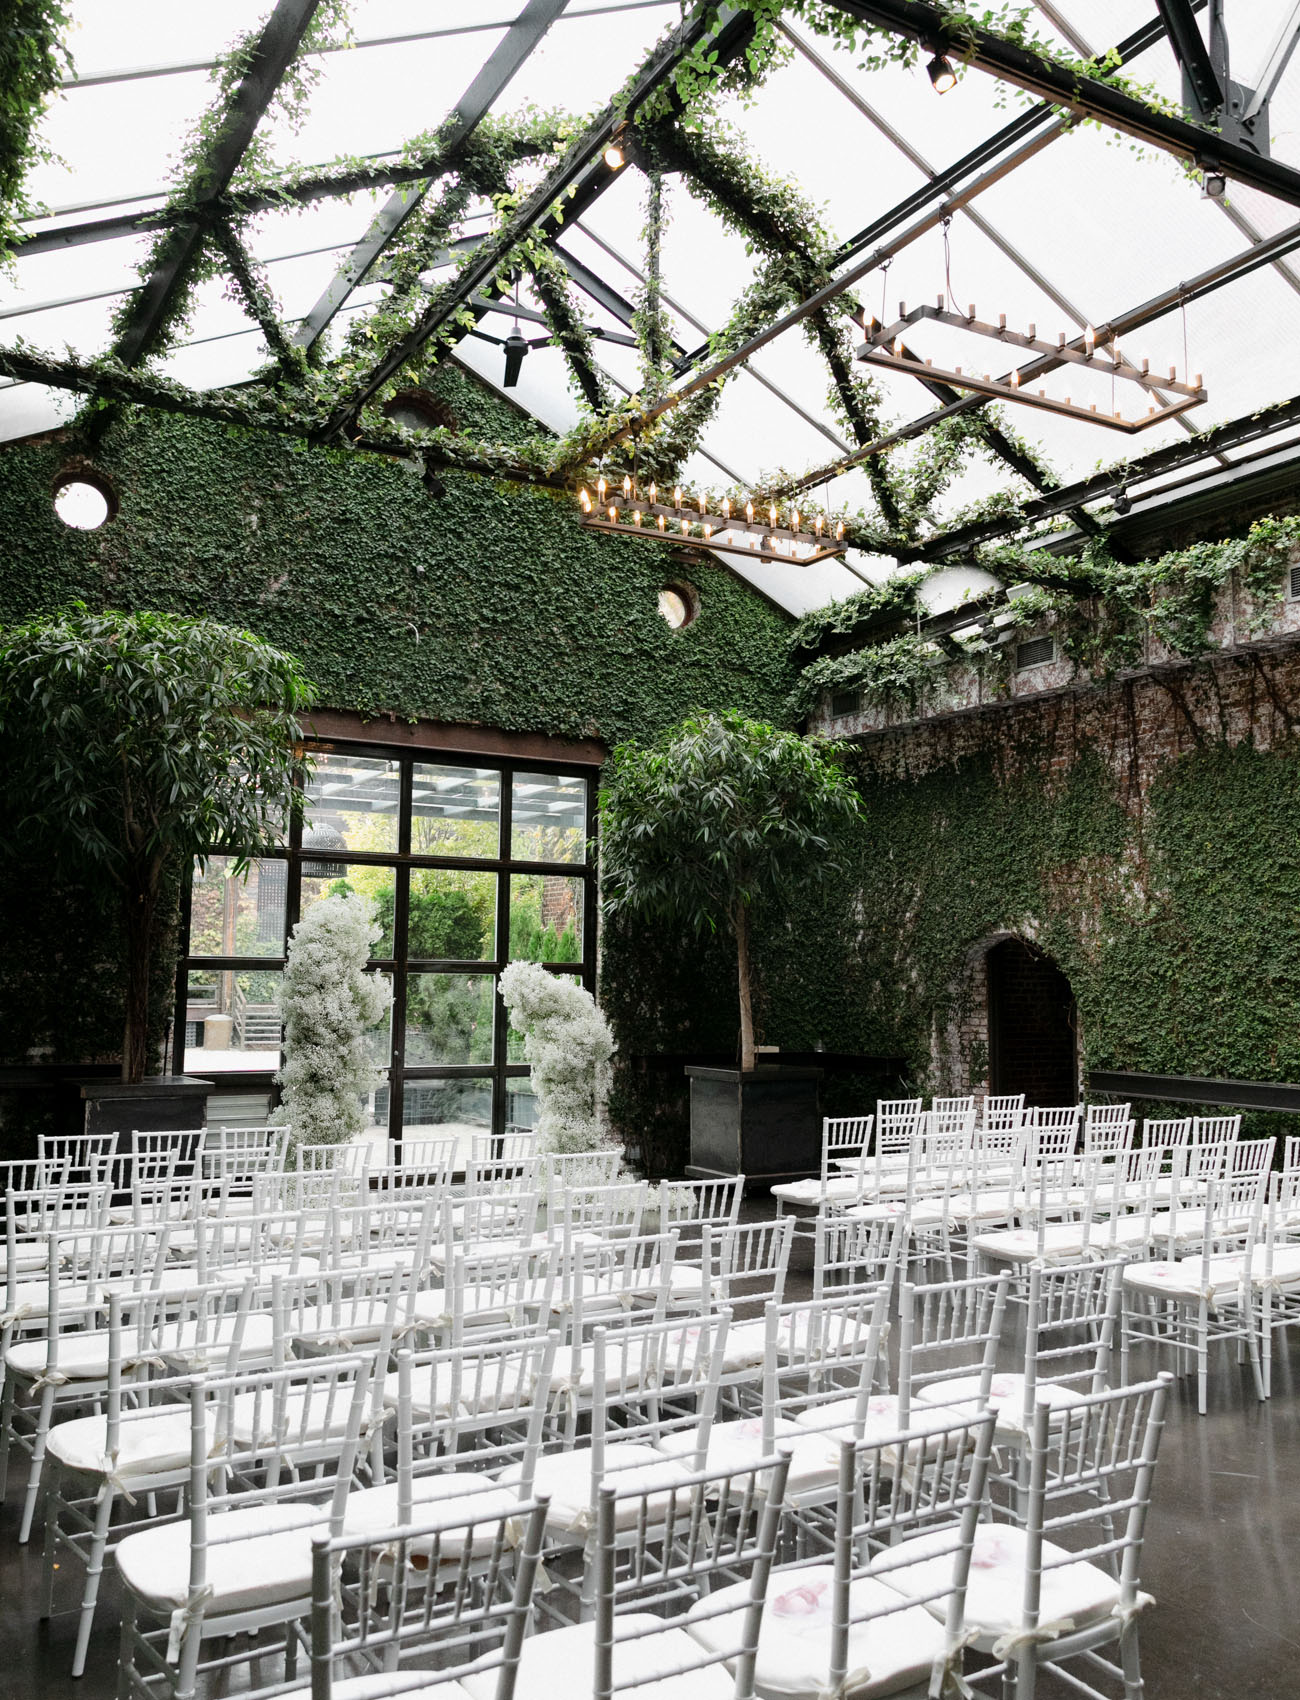 The wedding ceremony space was done with lots of greenery, chandeliers, a baby's breath altar and white chairs